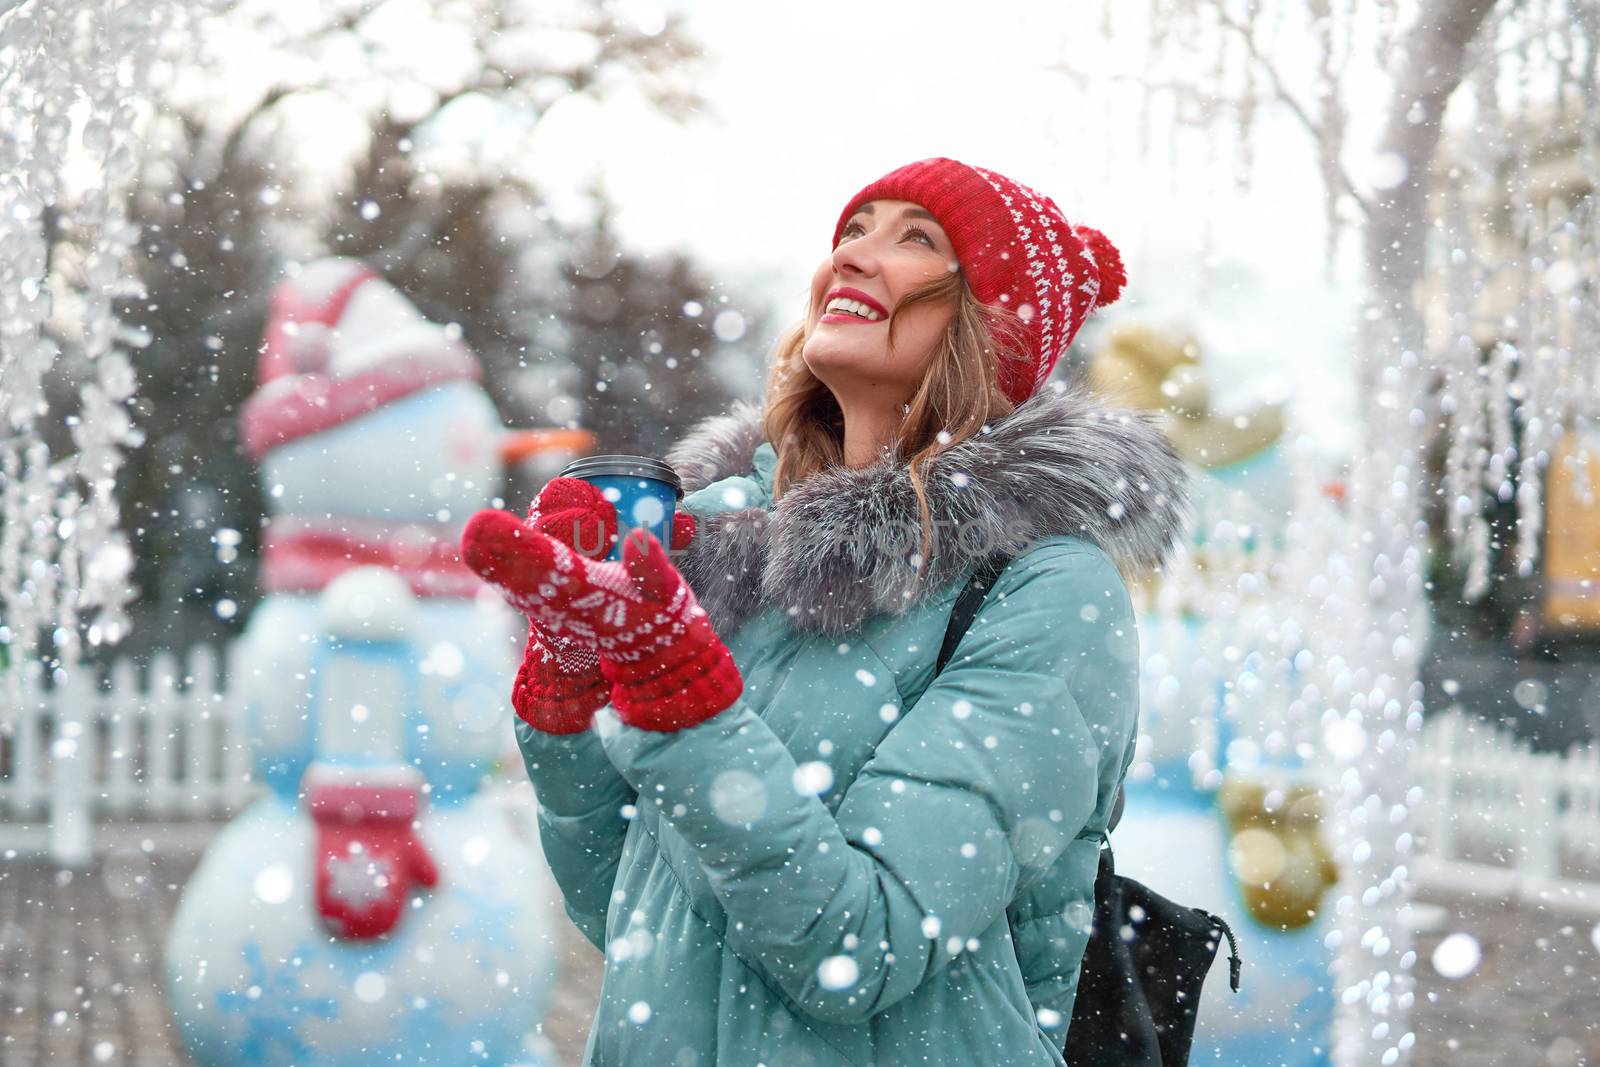 Beautiful lovely middle-aged girl curly hair warm winter jackets red knitted hat glove stands ice rink background Town Square Christmas mood lifestyle Happy holiday woman drink hot beverage coffee